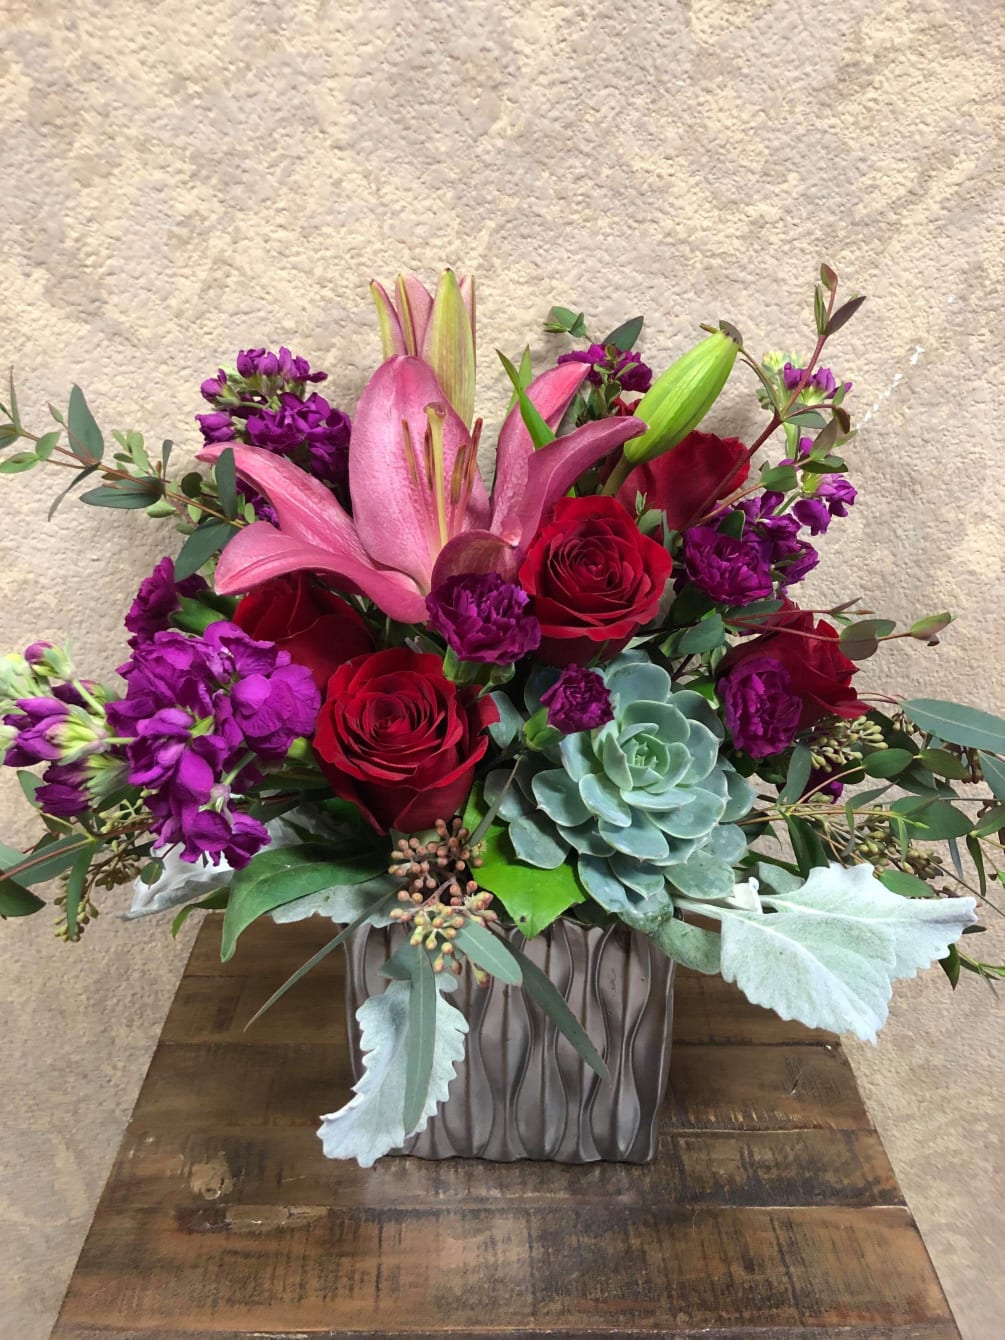 This romantic design has a mix of dark purples, passionate reds, and